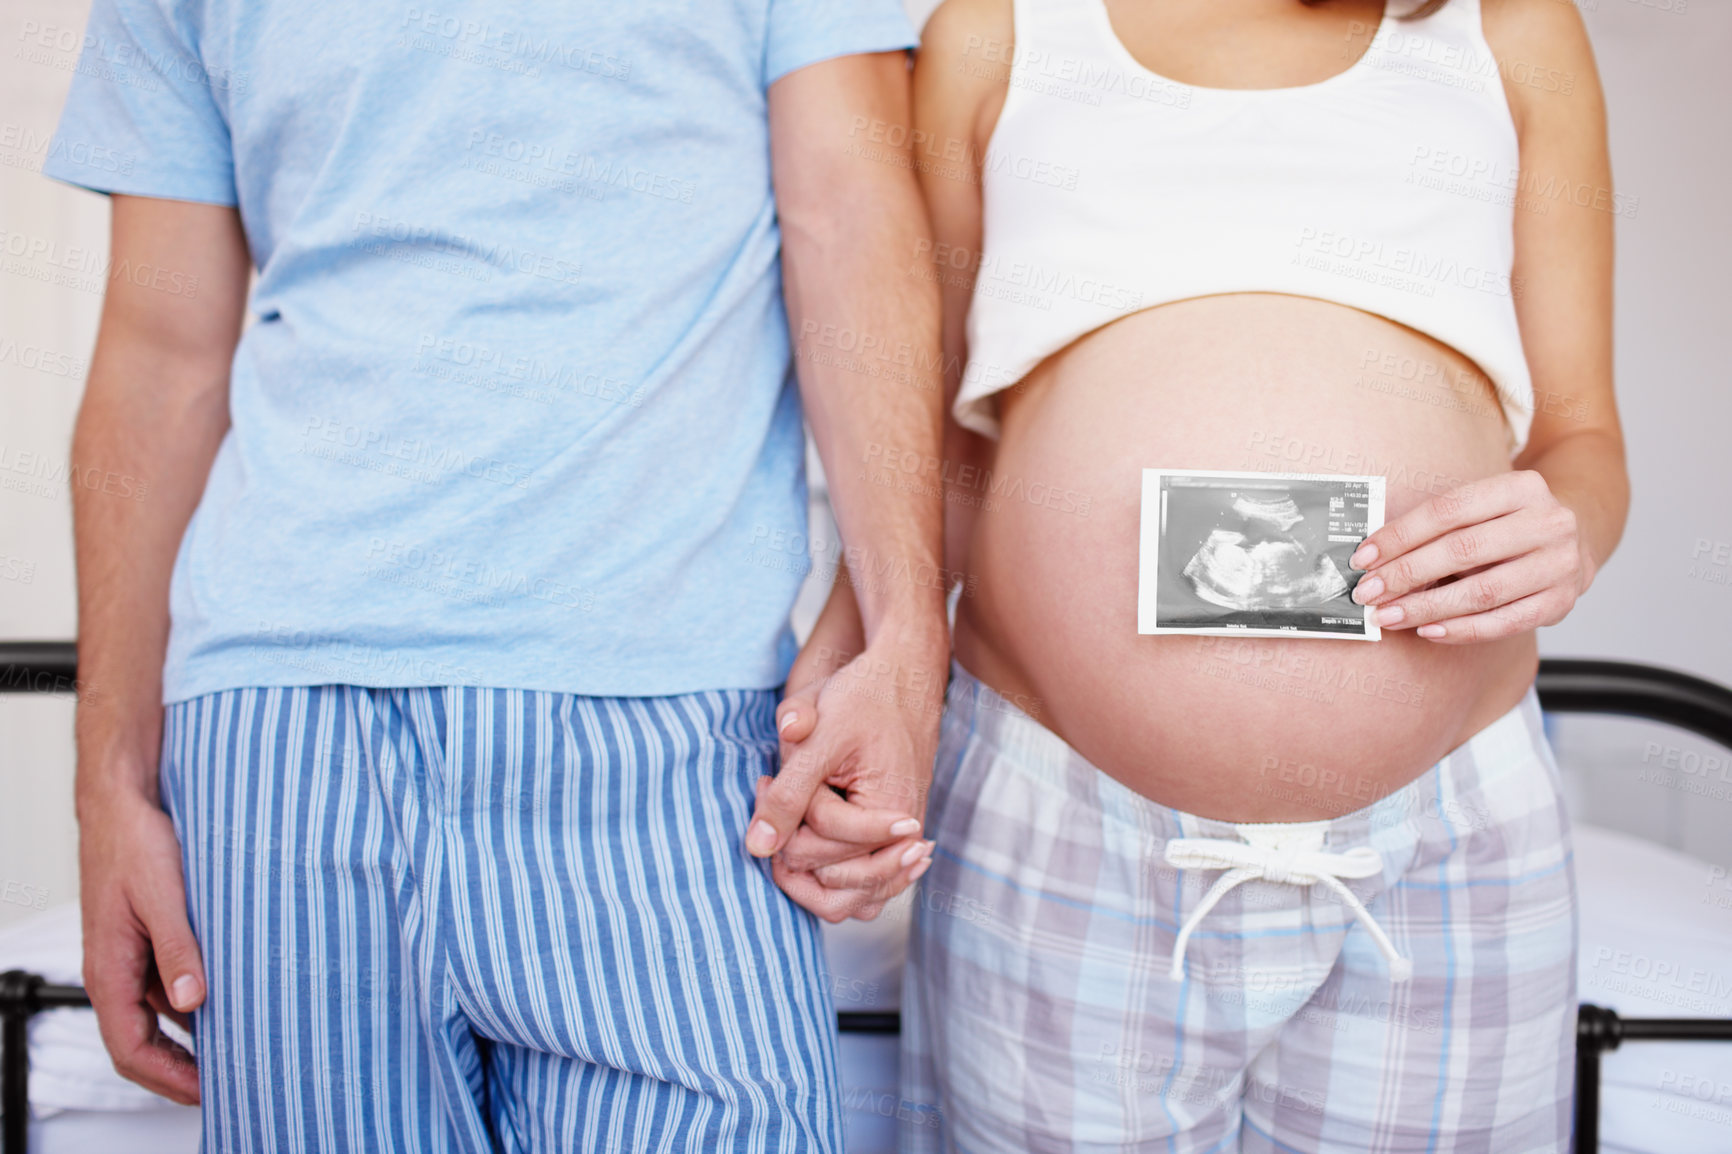 Buy stock photo An expectant couple holding hands while she places an ultrasound photo over her belly